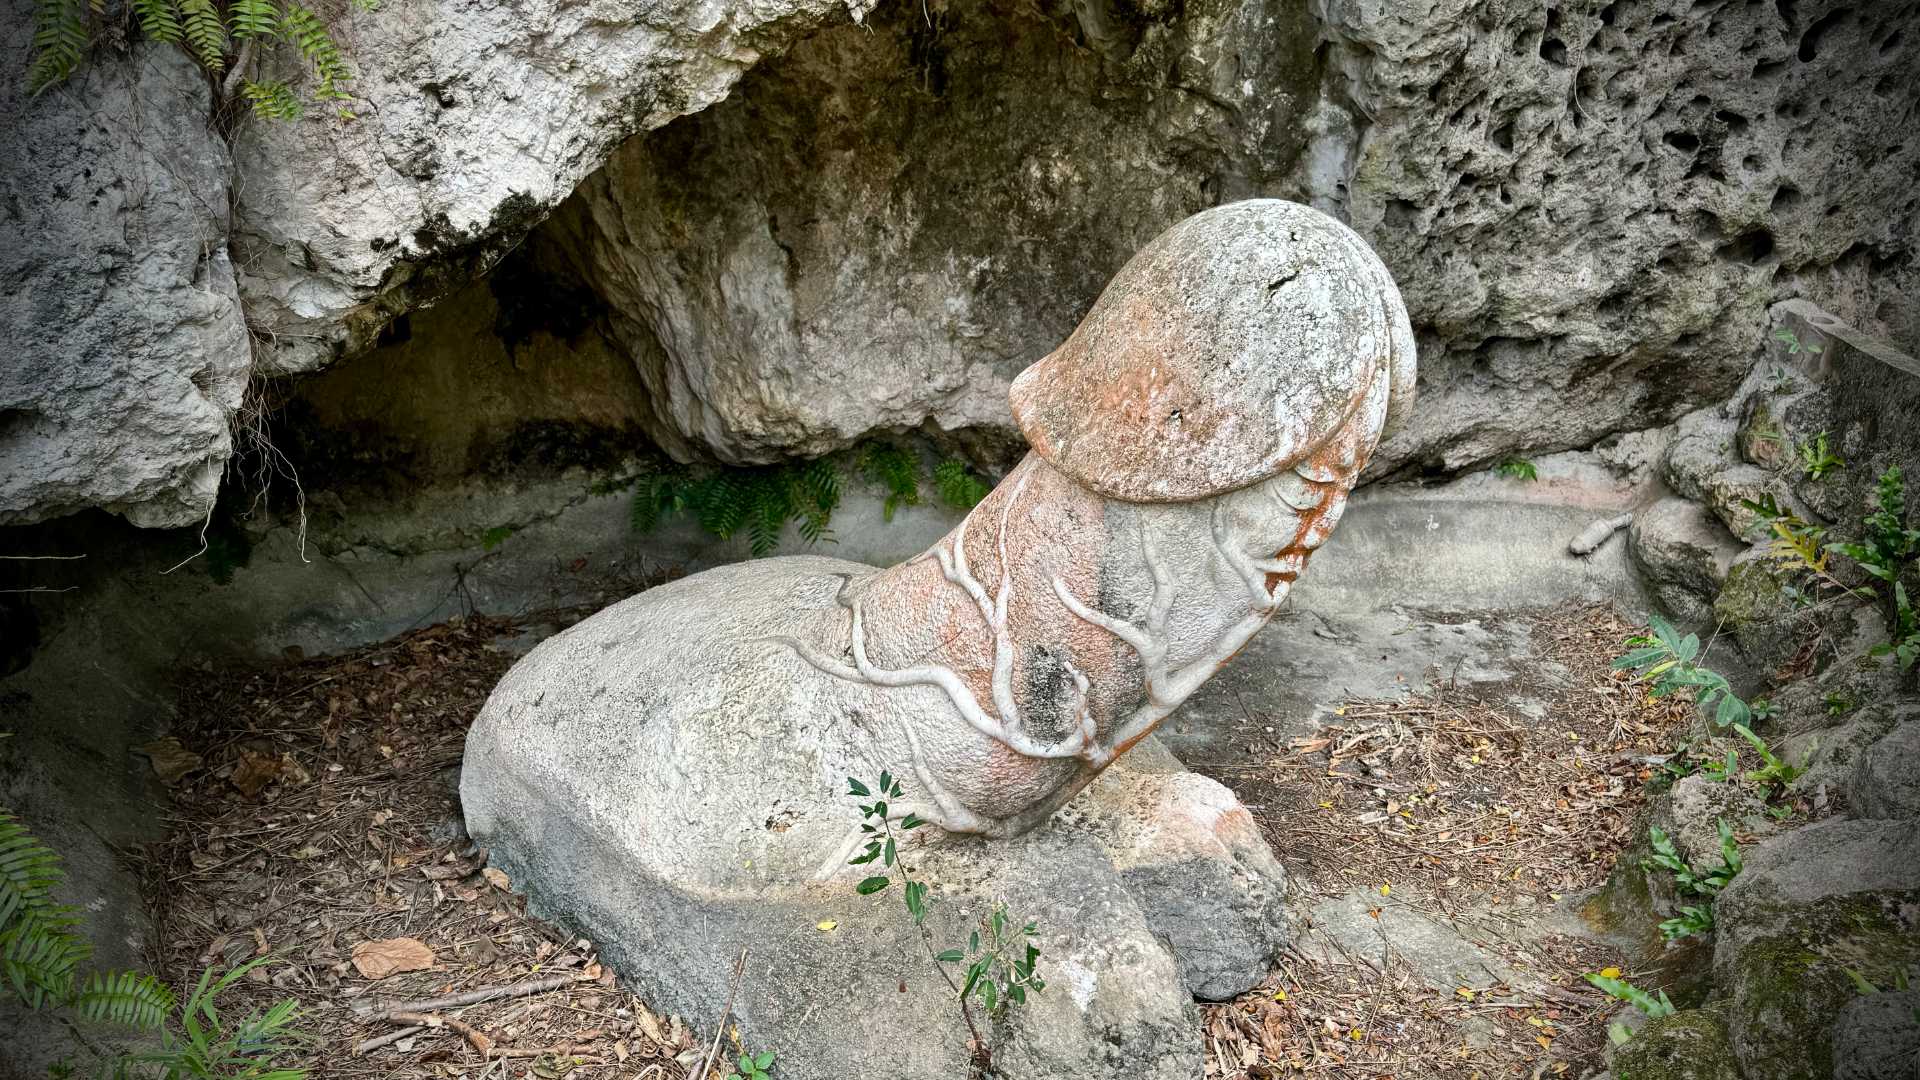 A large stone sculpture of an erect penis, inside a cave.